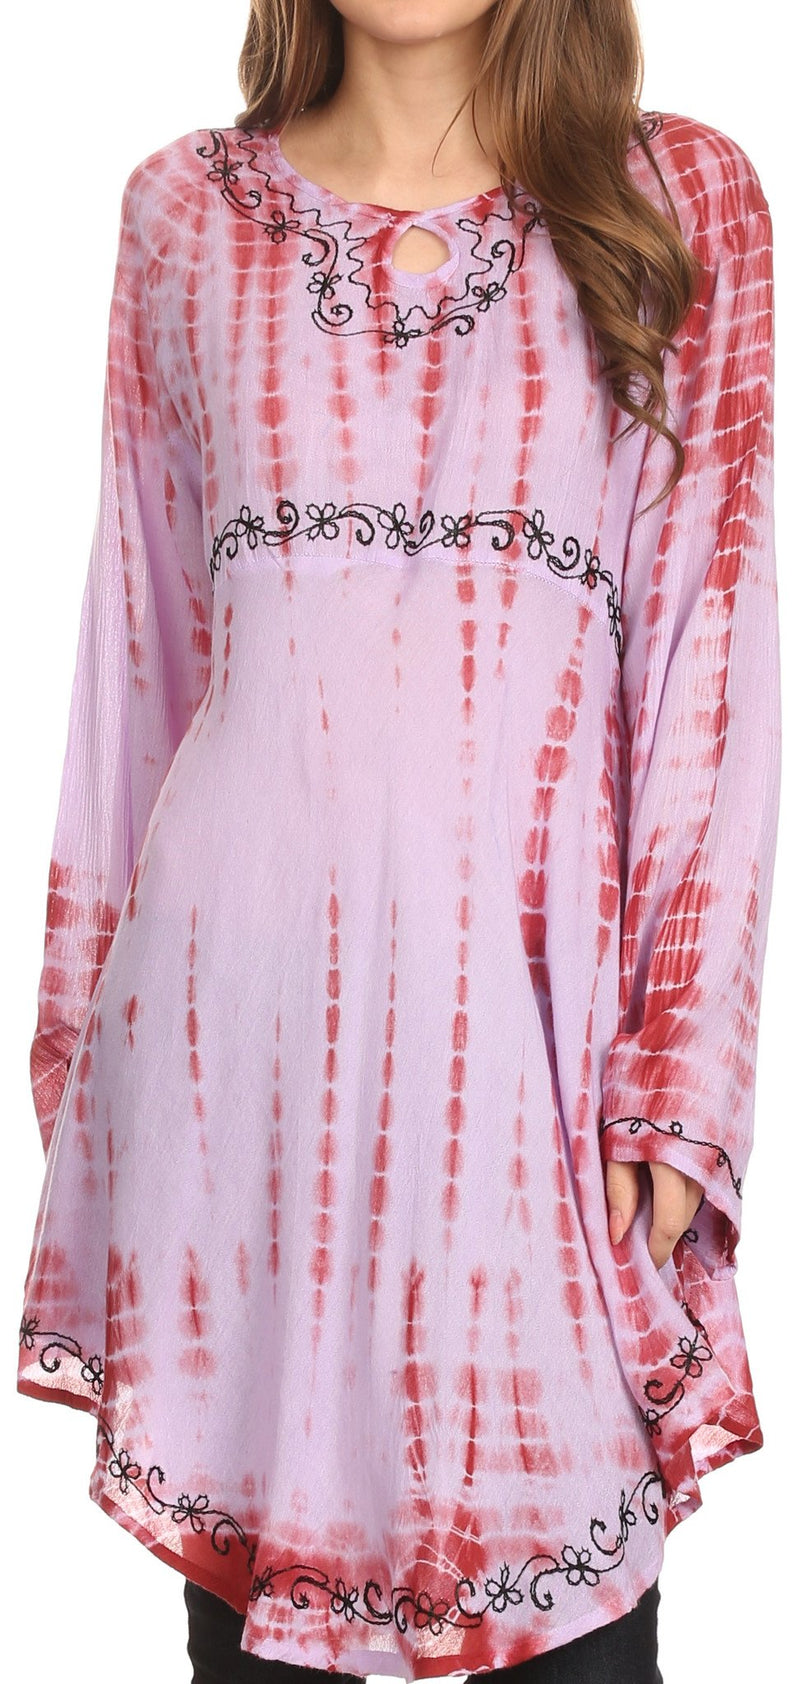 Sakkas Arissa Long Sleeved Tunic Blouse Embroidered Tie Dye Circle Dress / Cover Up